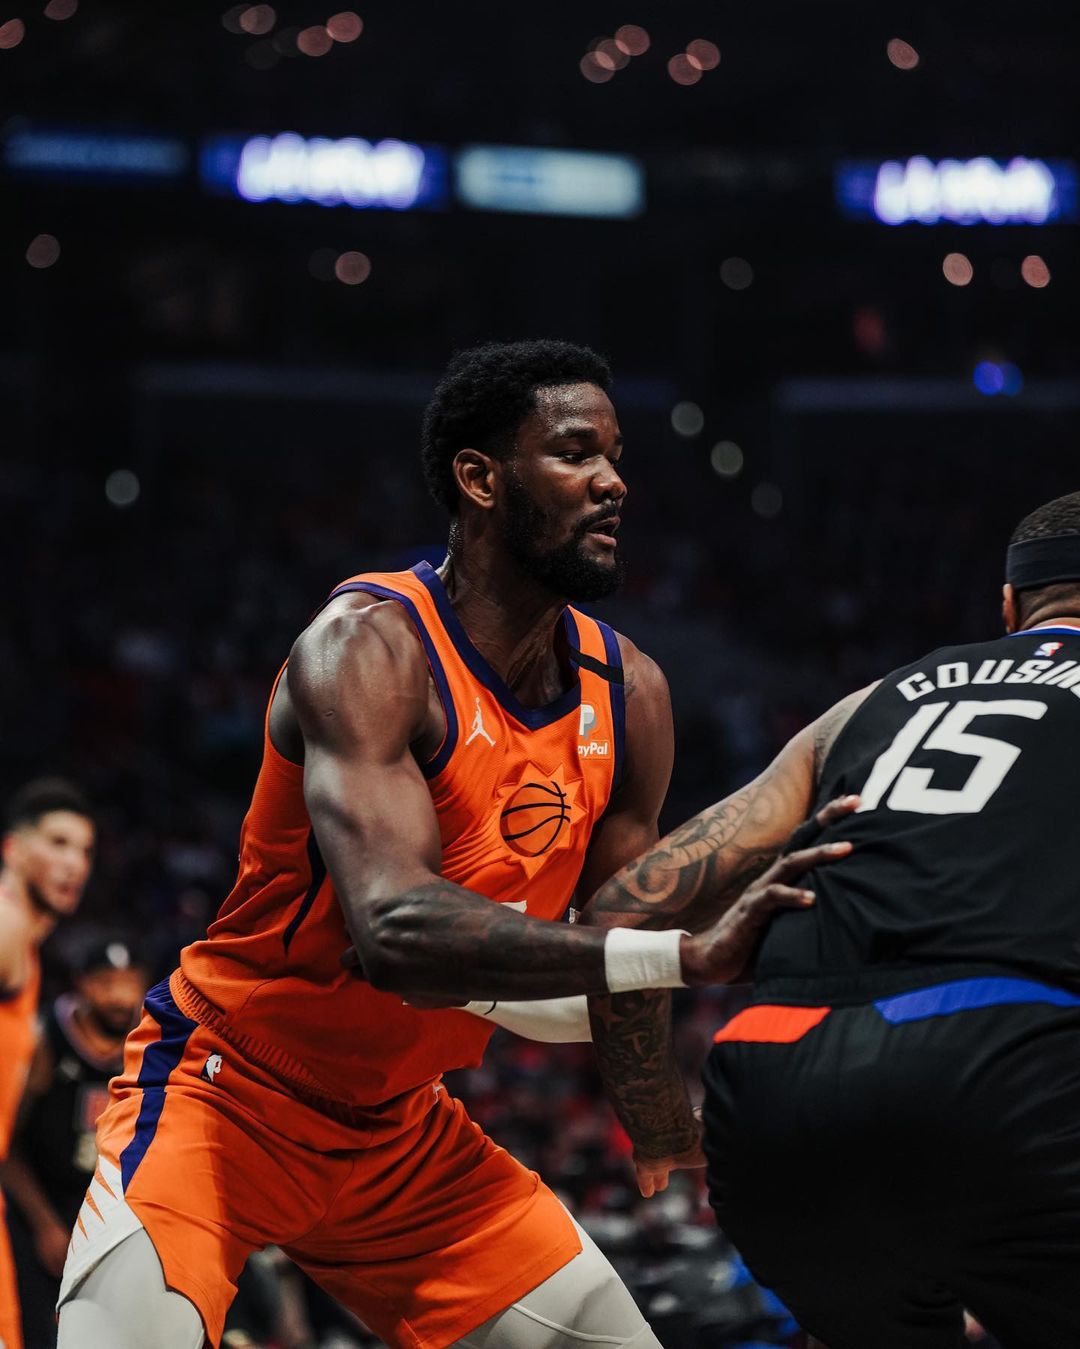 Deandre Ayton: The defensive dynamite behind the success of the Phoenix Suns